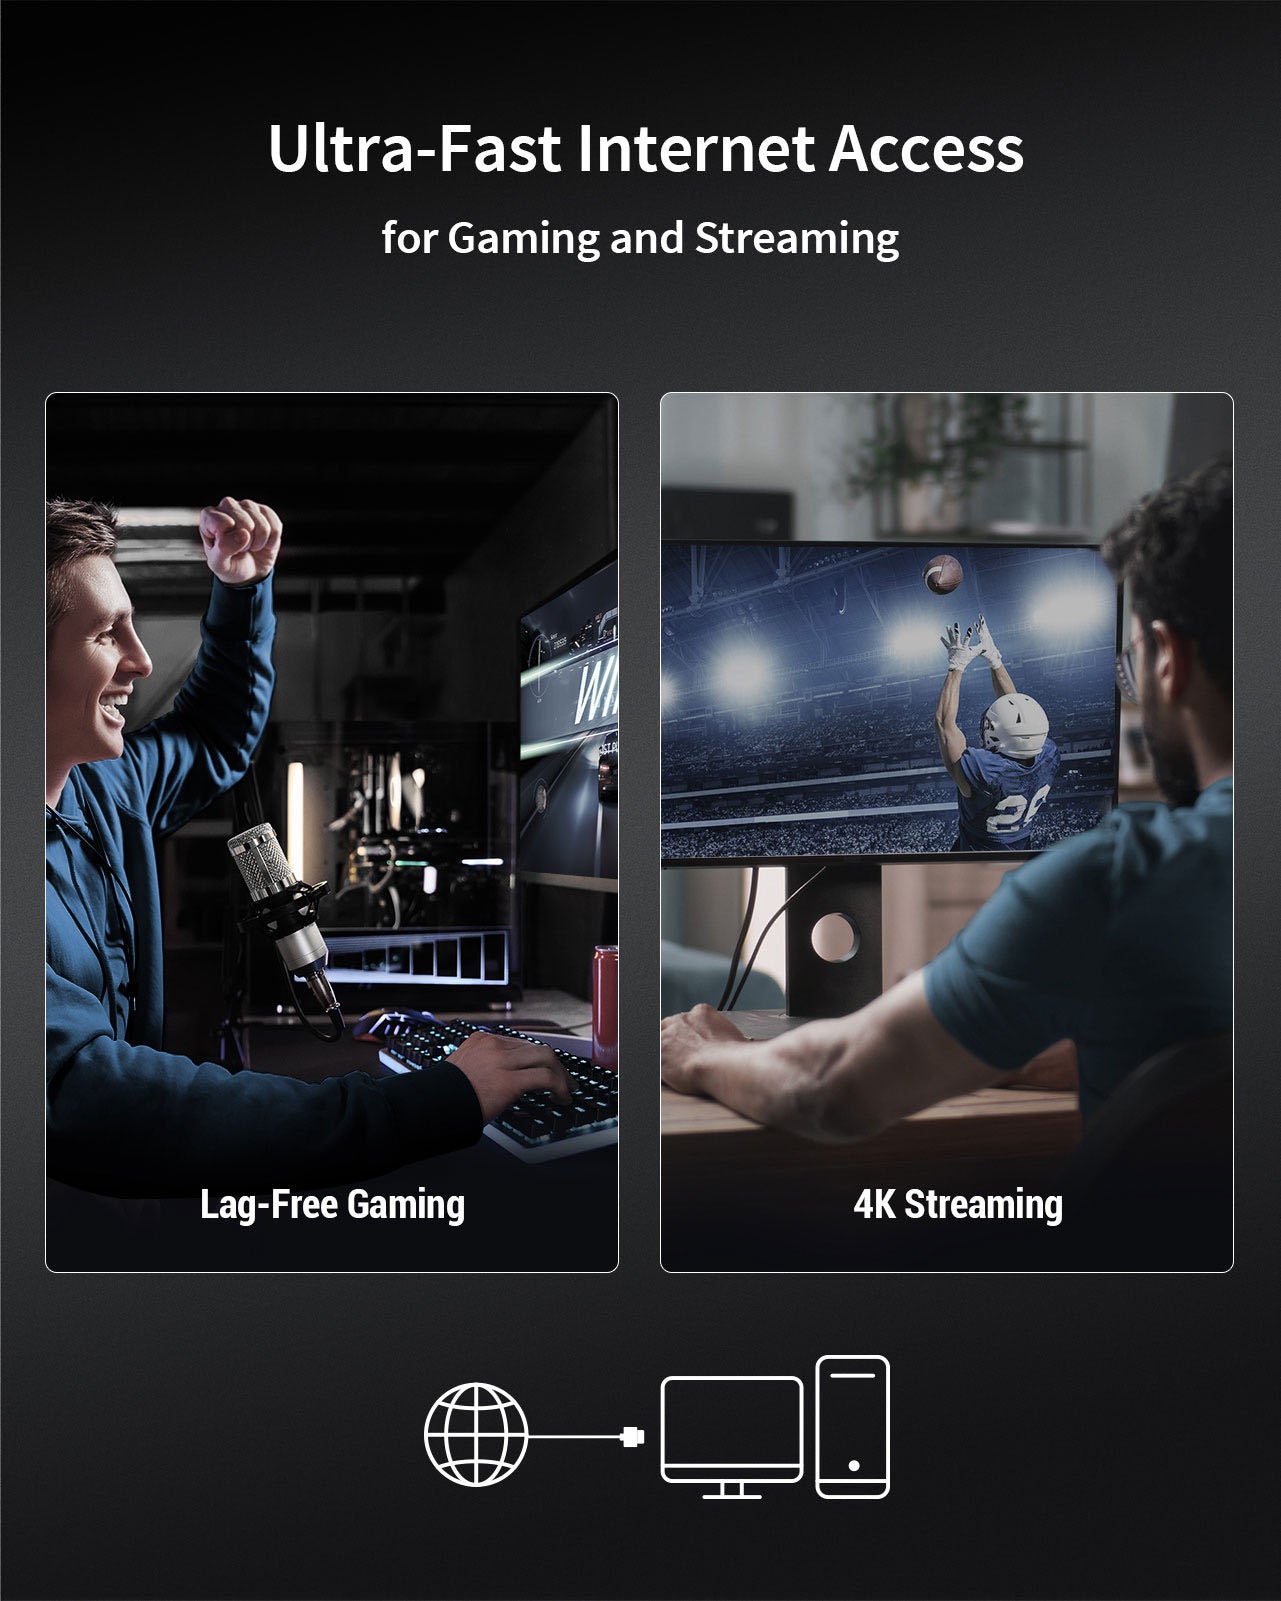 2.5GB PCIe Network Card Delivers Fast Internet Access with Low Latency Perfect for Seamless Gaming 4K Streaming